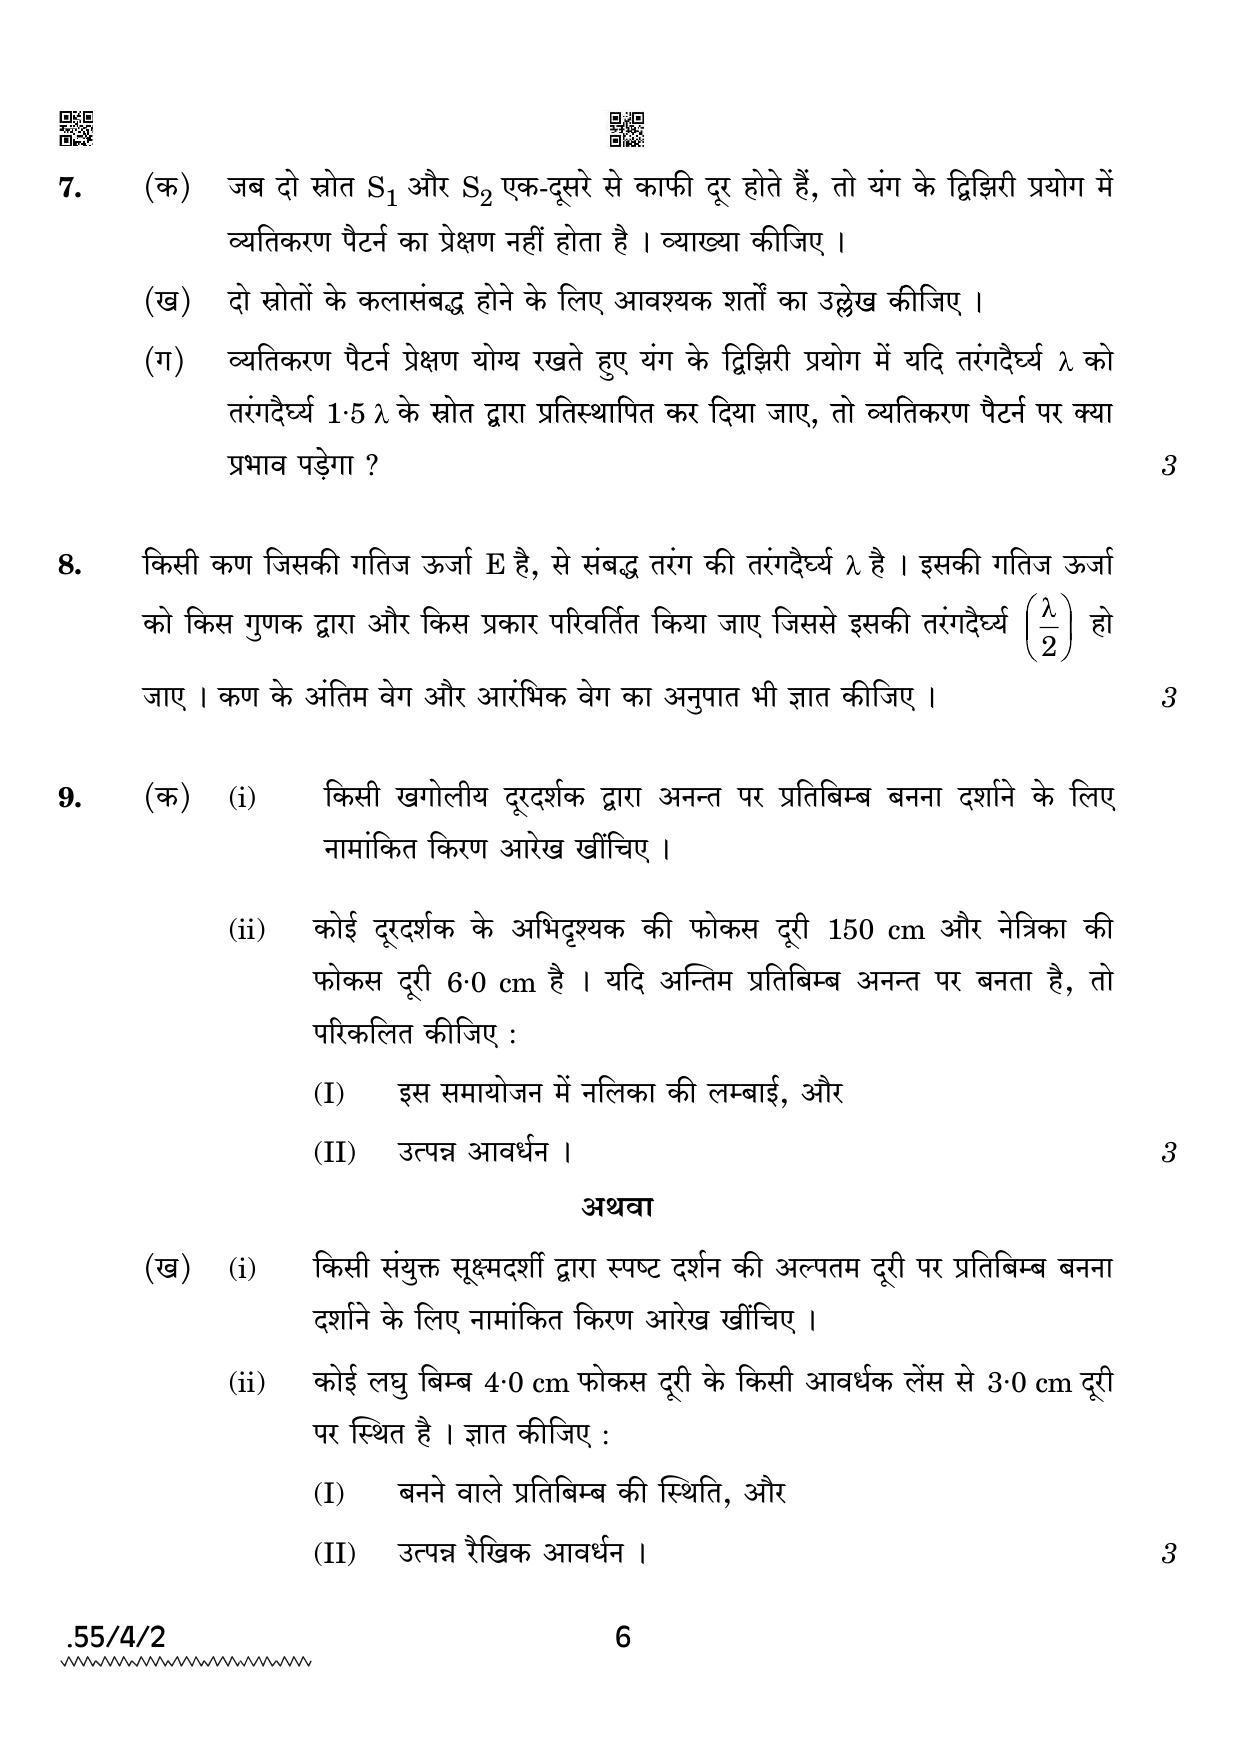 CBSE Class 12 55-4-2 Physics 2022 Question Paper - Page 6